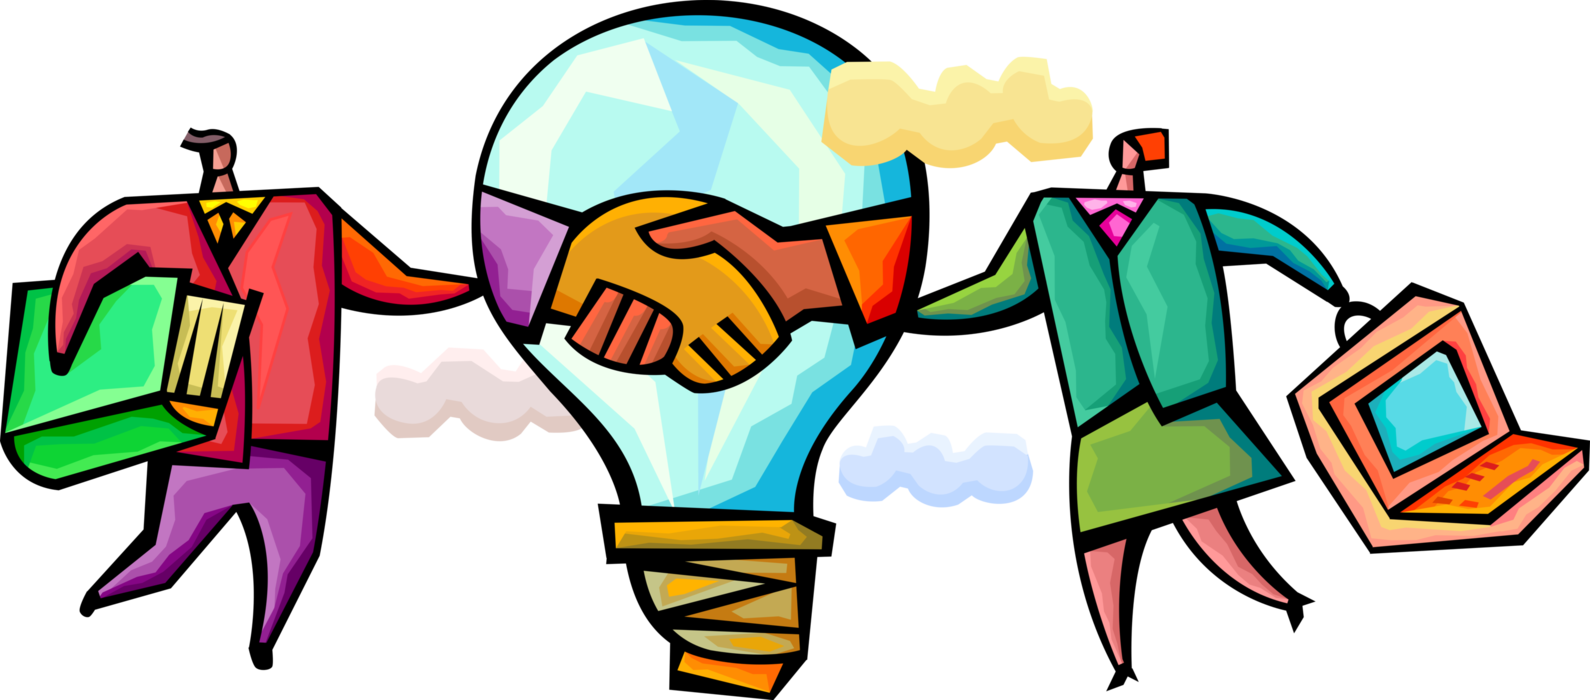 Vector Illustration of Business Partners Shake Hands with Electric Light Bulb Symbol of Invention, Innovation, and Good Ideas